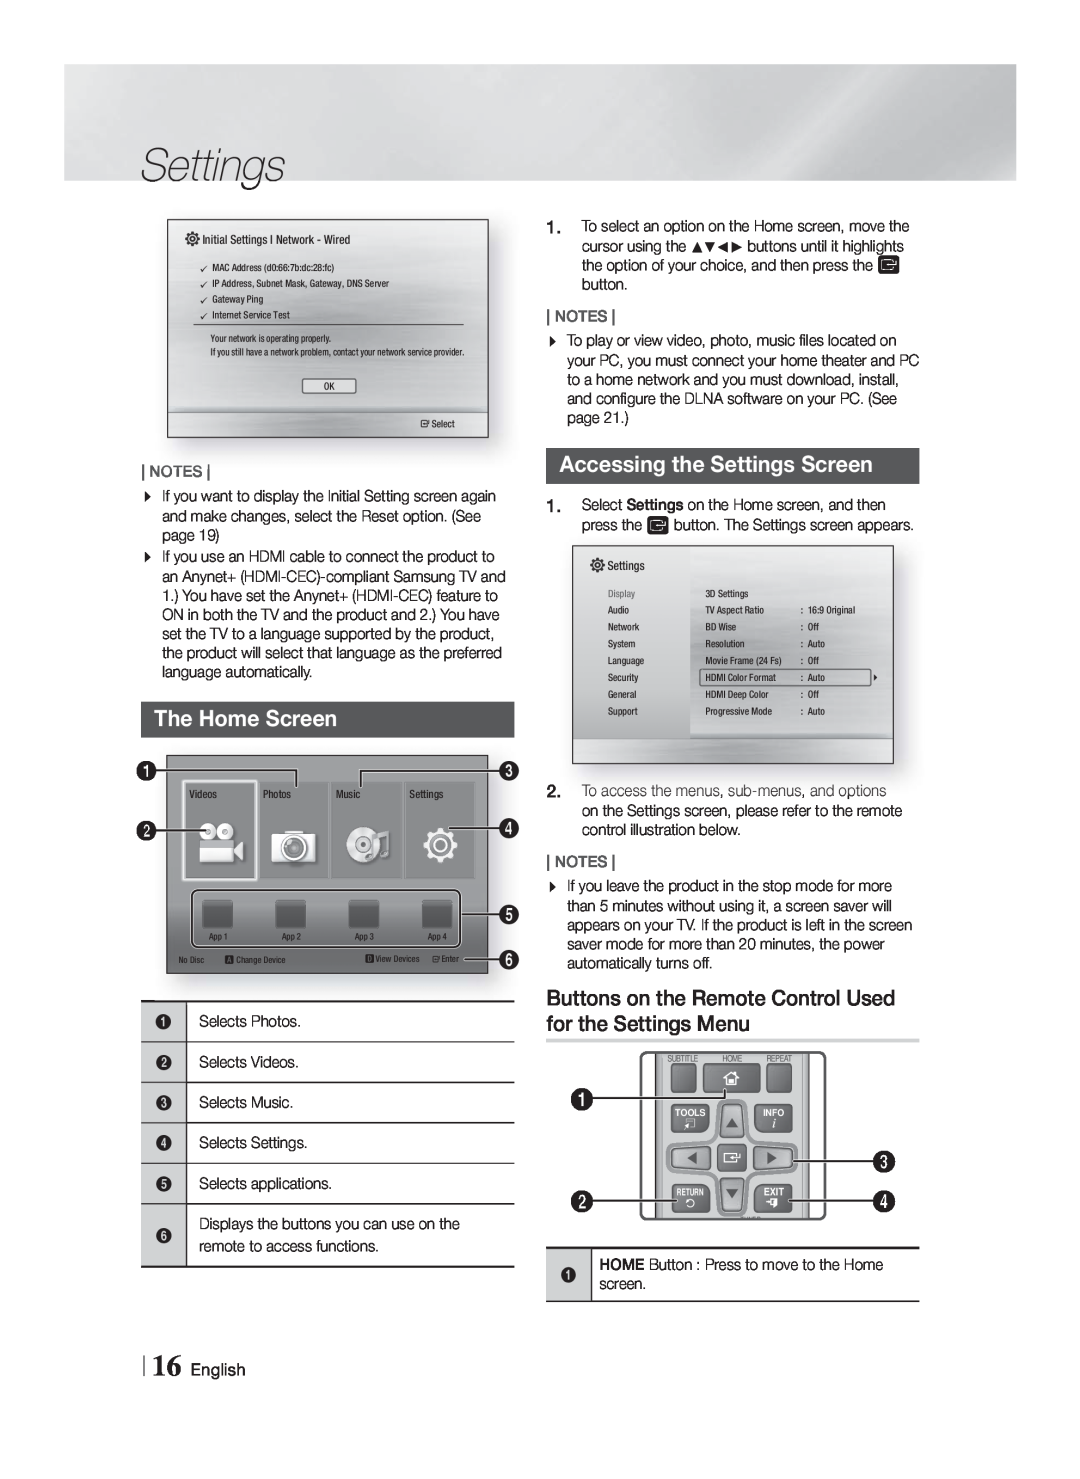 Samsung HTF4500ZA user manual The Home Screen, Accessing the Settings Screen, English, Notes 